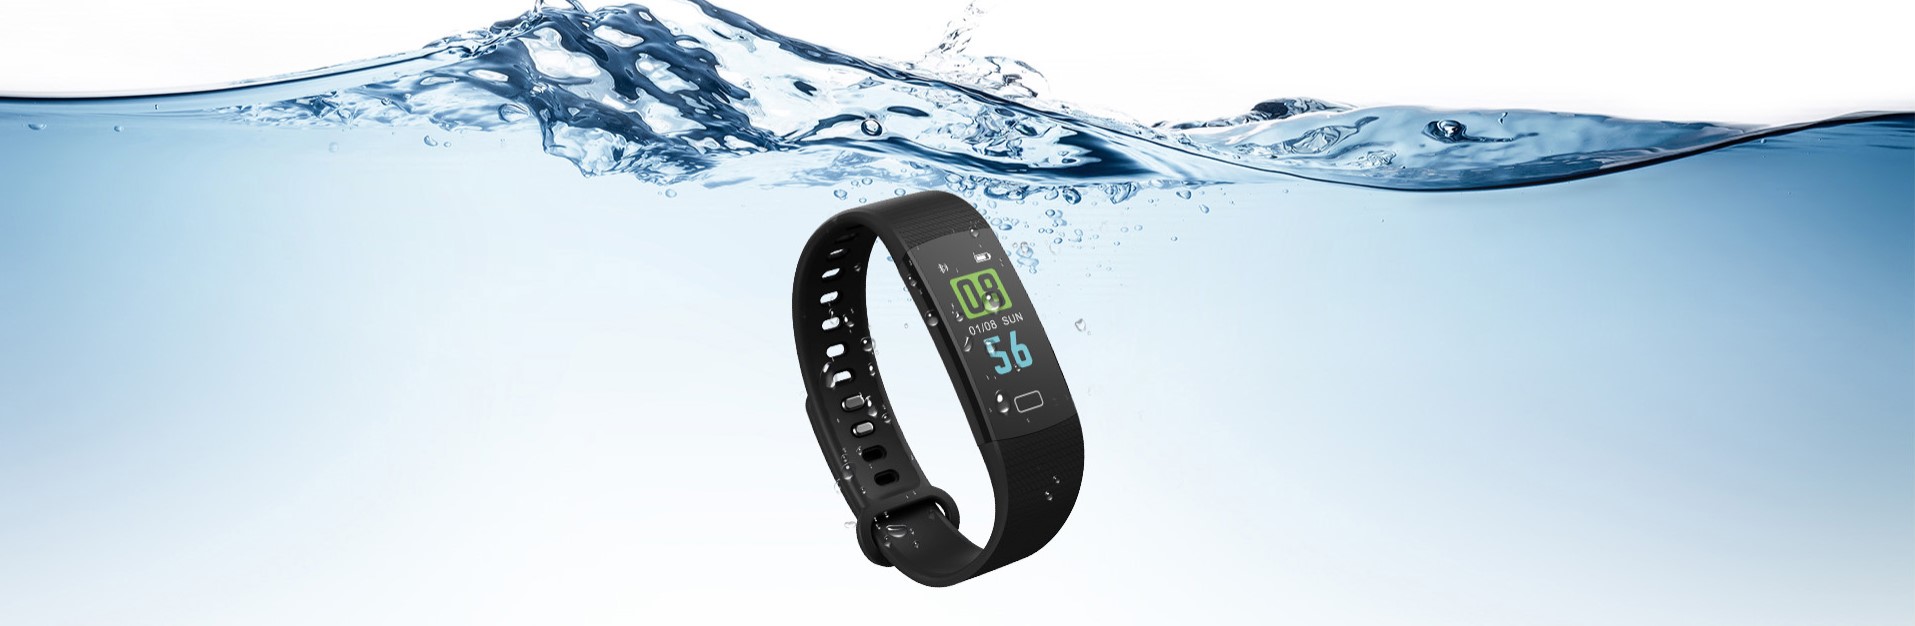 Riversong_Wave_S_Smart_Fitness_Band_FT11_in_Black_sold_by_Technomobi_4